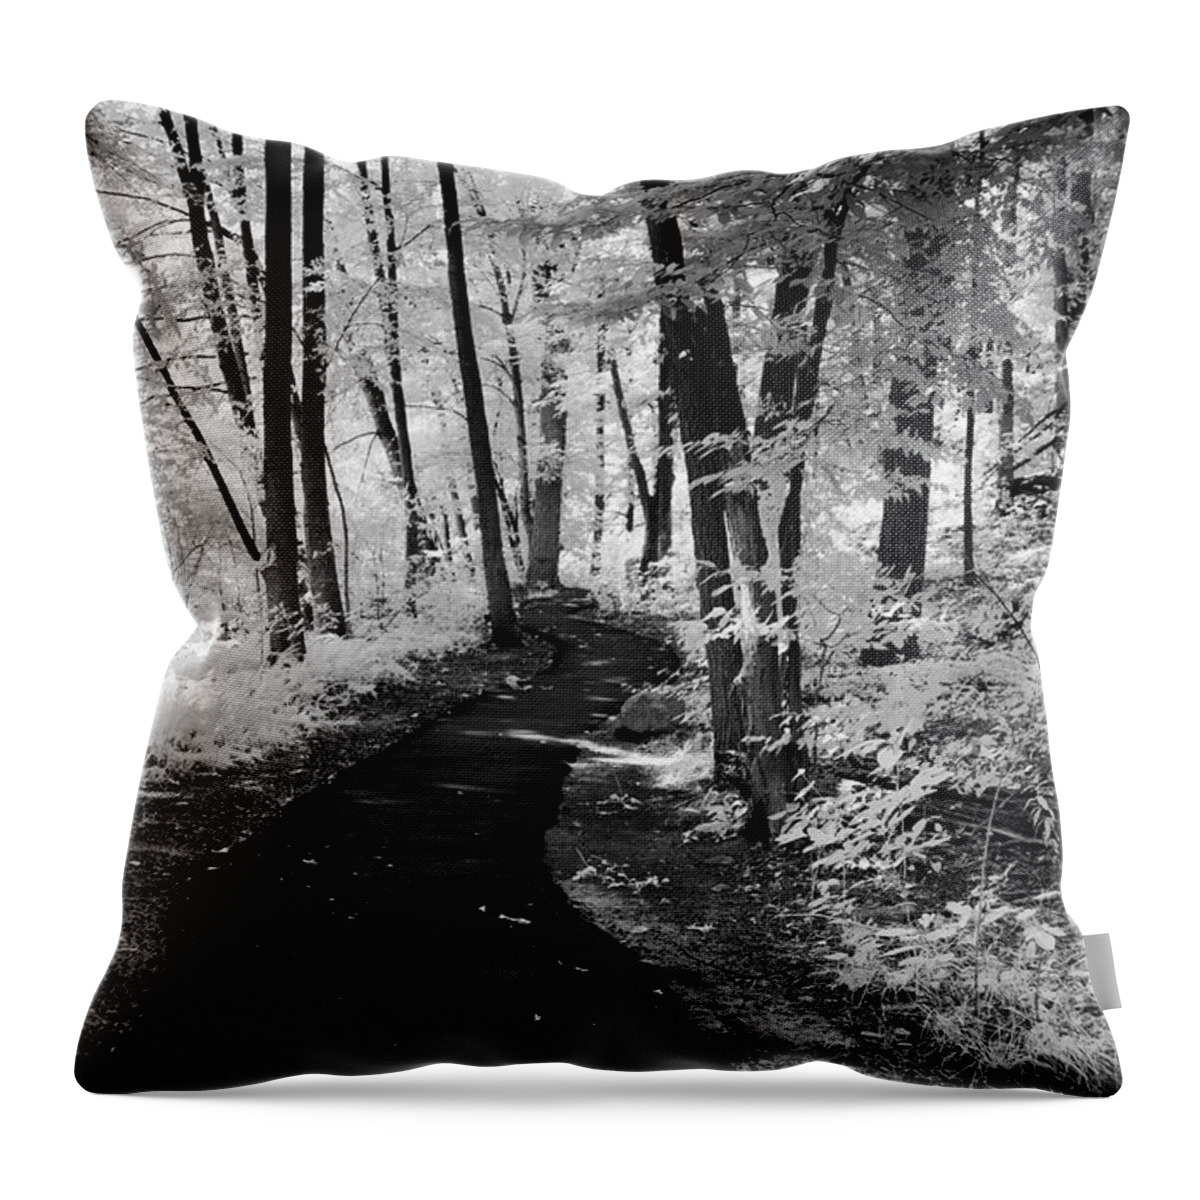 B&w Throw Pillow featuring the photograph Forbidden Forest by Anthony Sacco